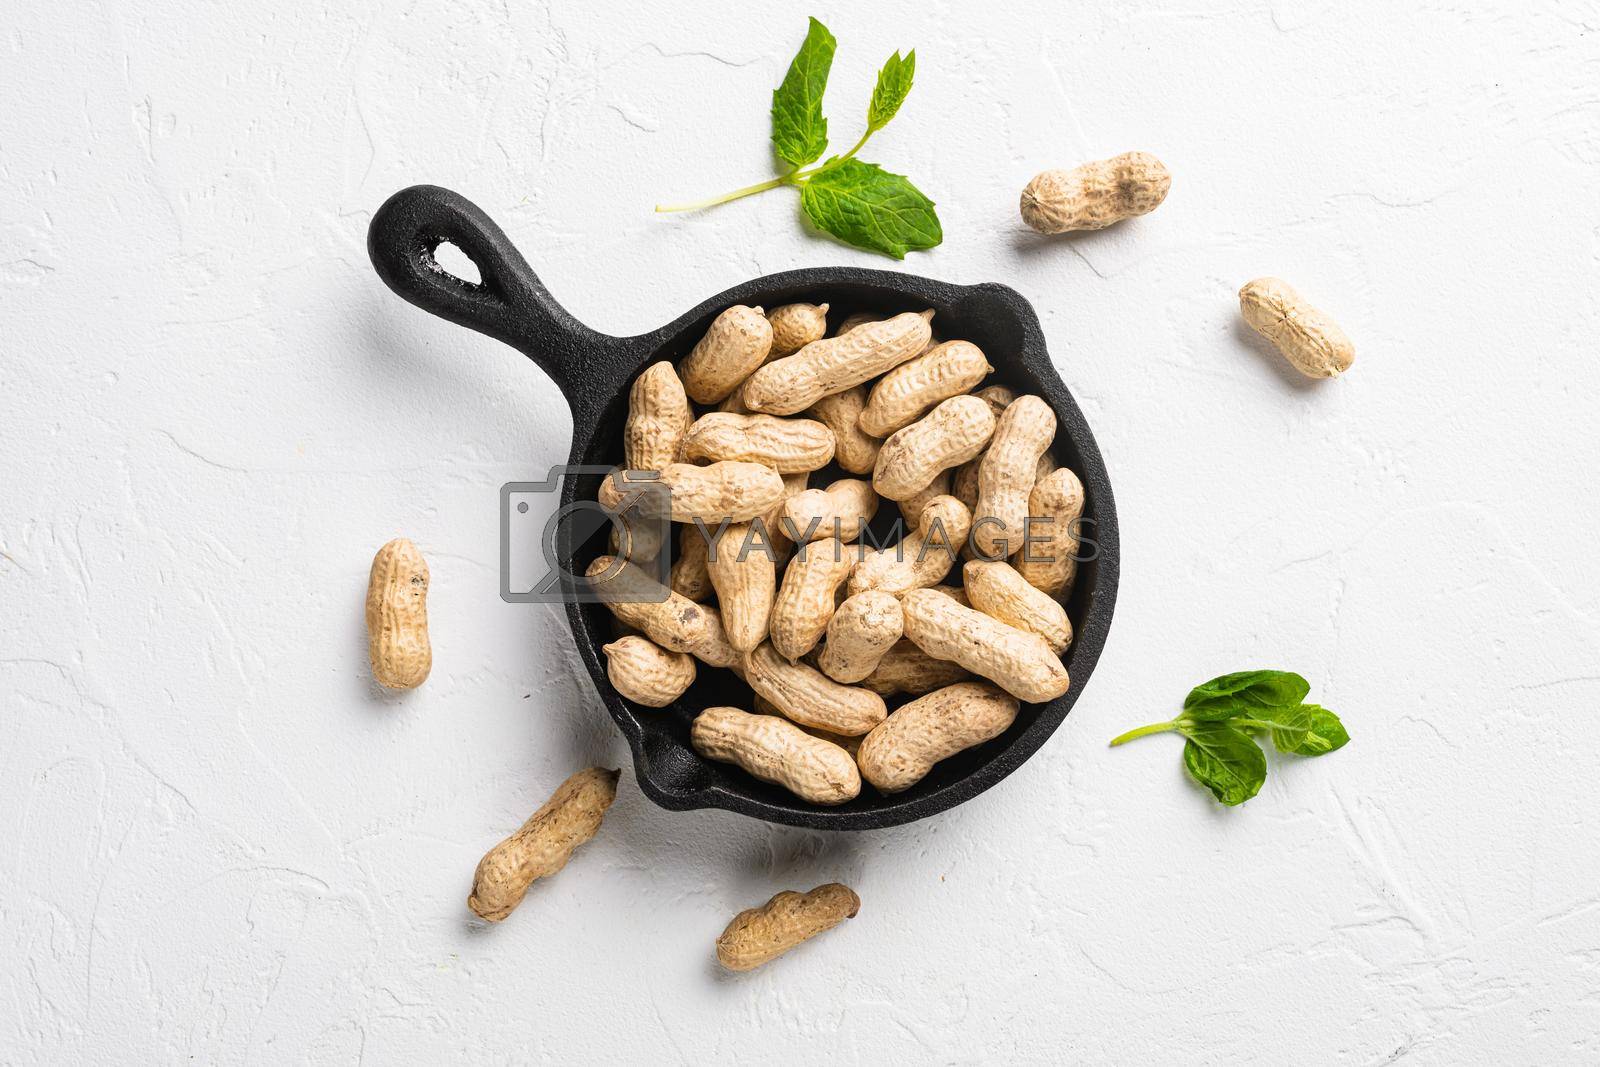 Royalty free image of Organic peanuts in shell, on white stone table background, top view flat lay by Ilianesolenyi